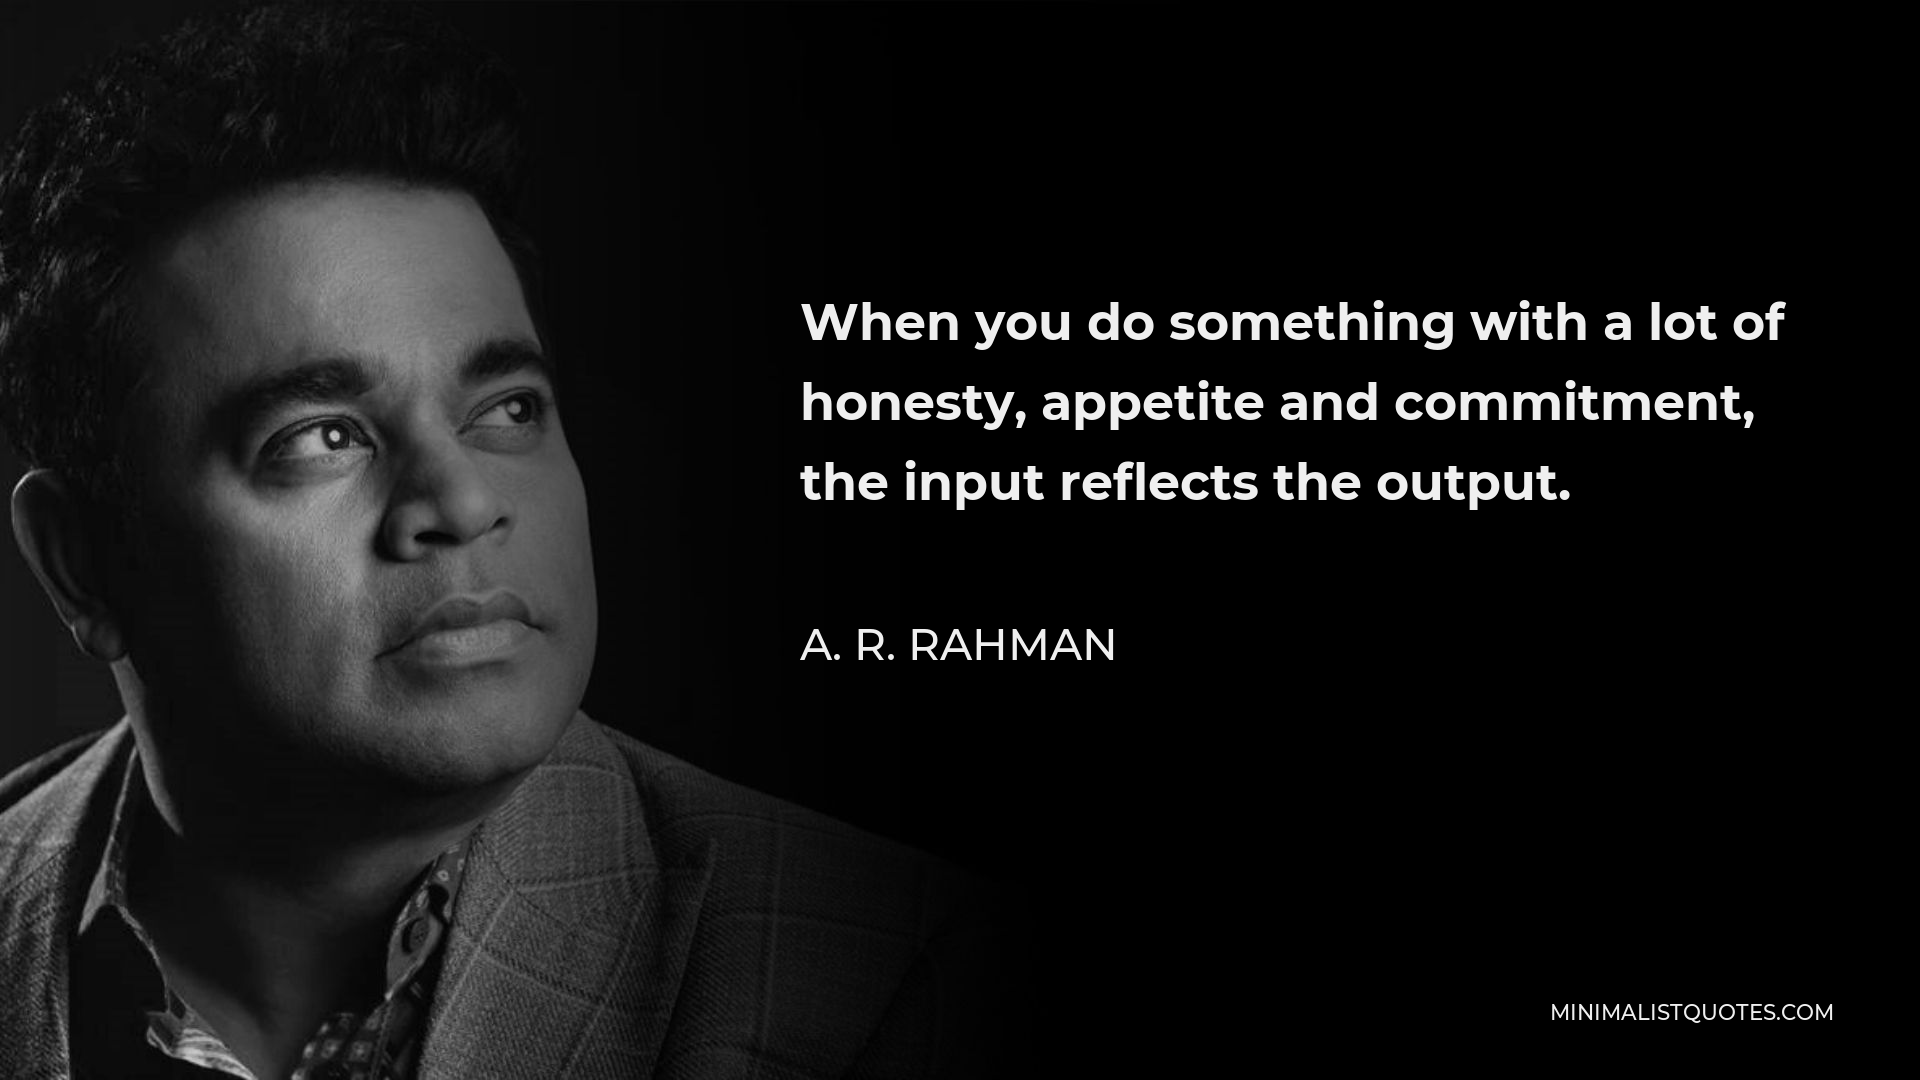 A. R. Rahman Quote - When you do something with a lot of honesty, appetite and commitment, the input reflects the output.